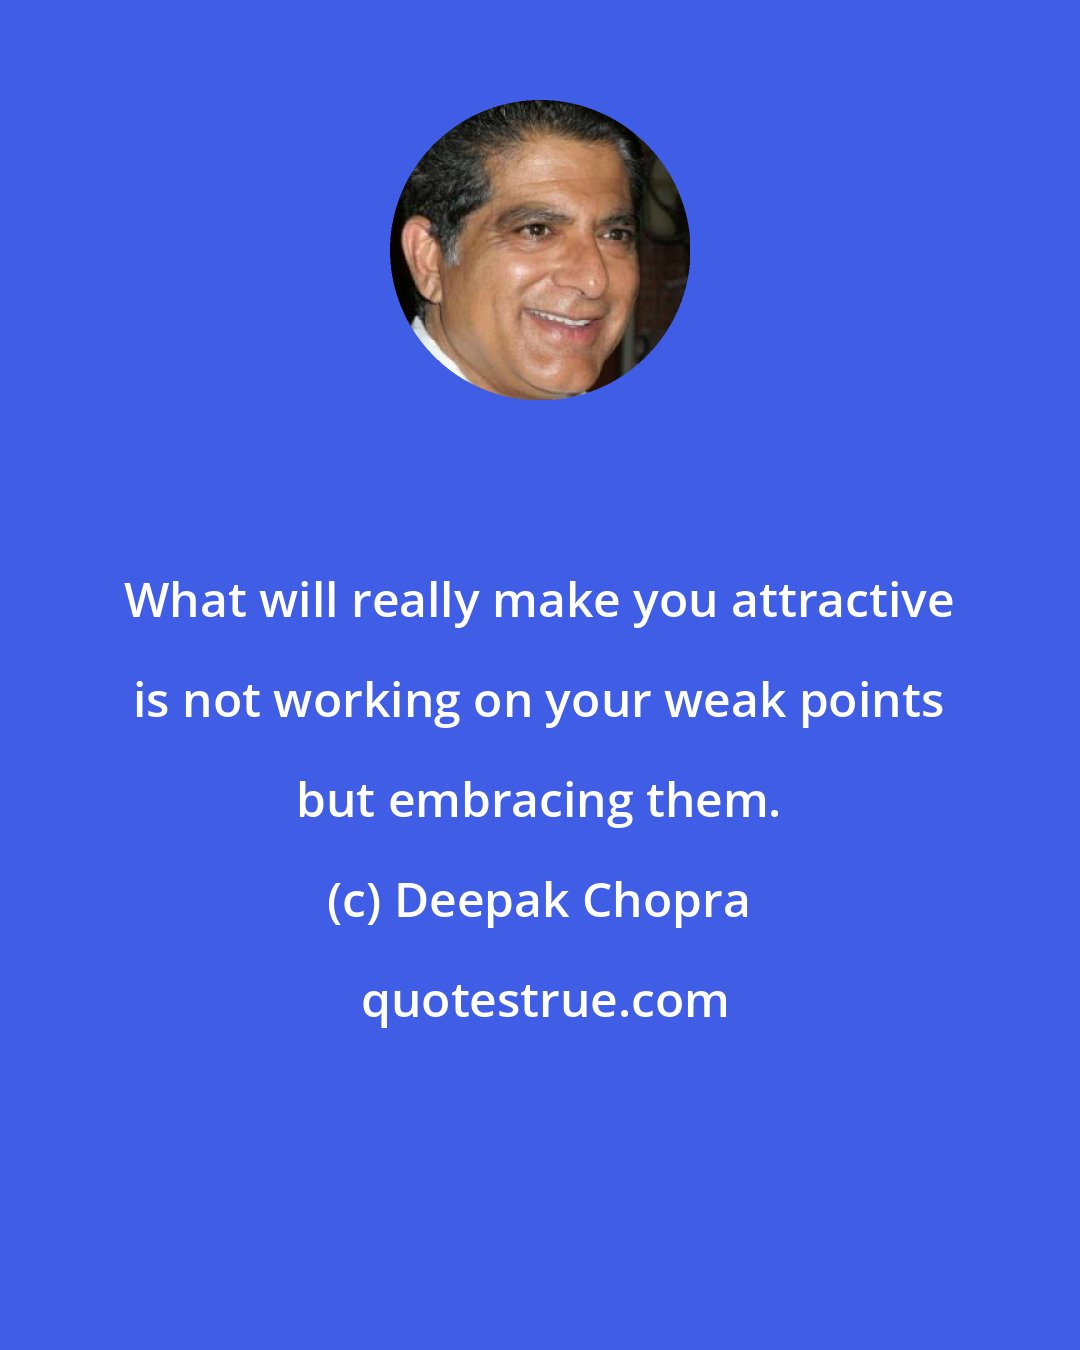 Deepak Chopra: What will really make you attractive is not working on your weak points but embracing them.